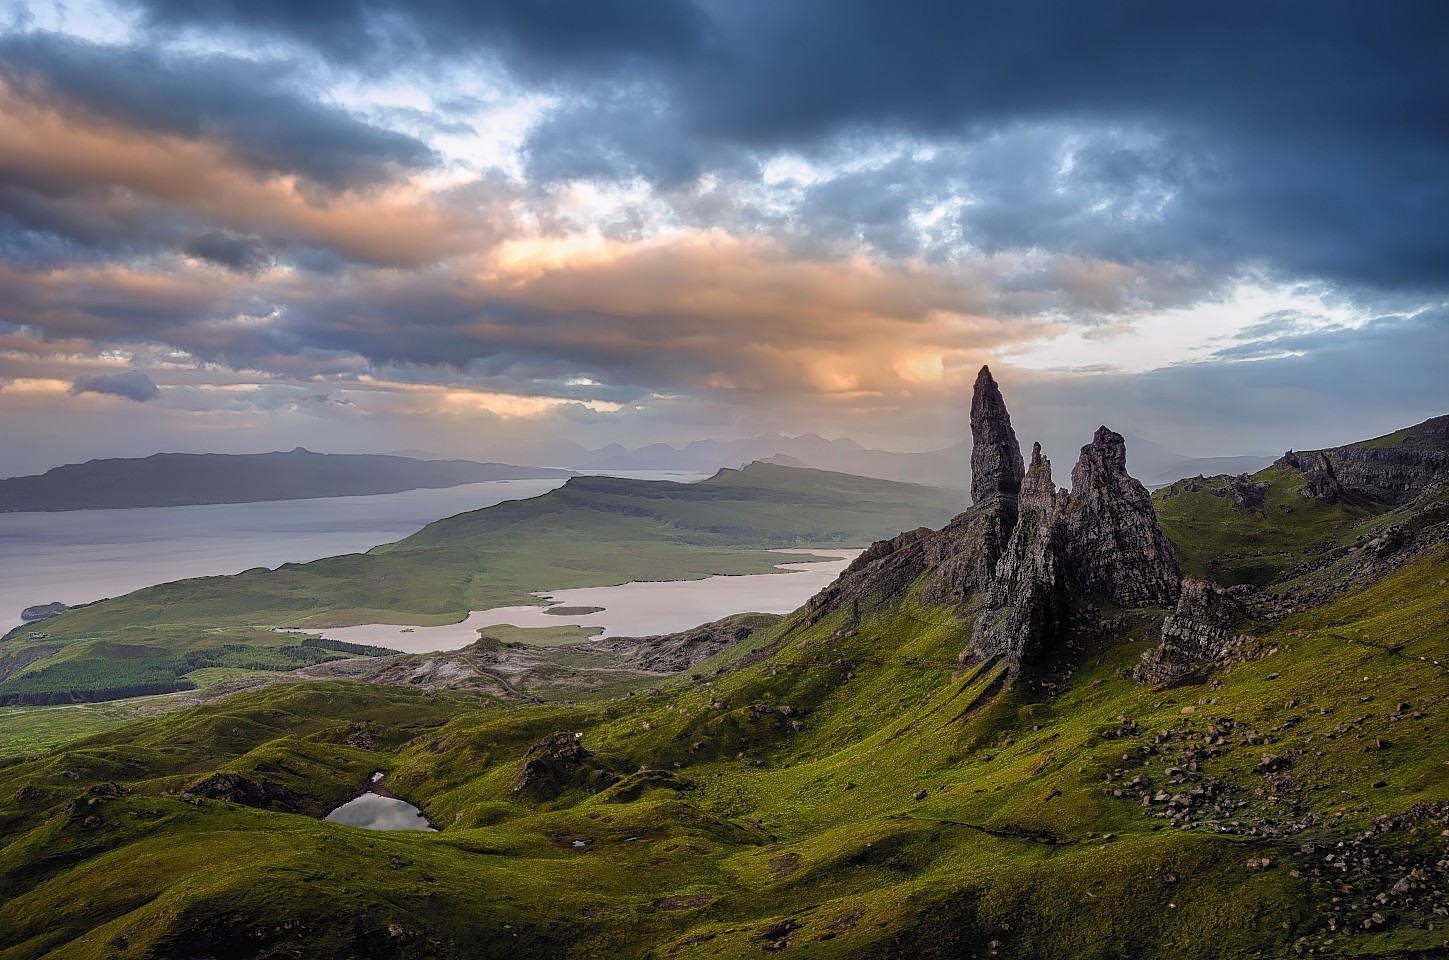 The Old Man of Storr on Skye.